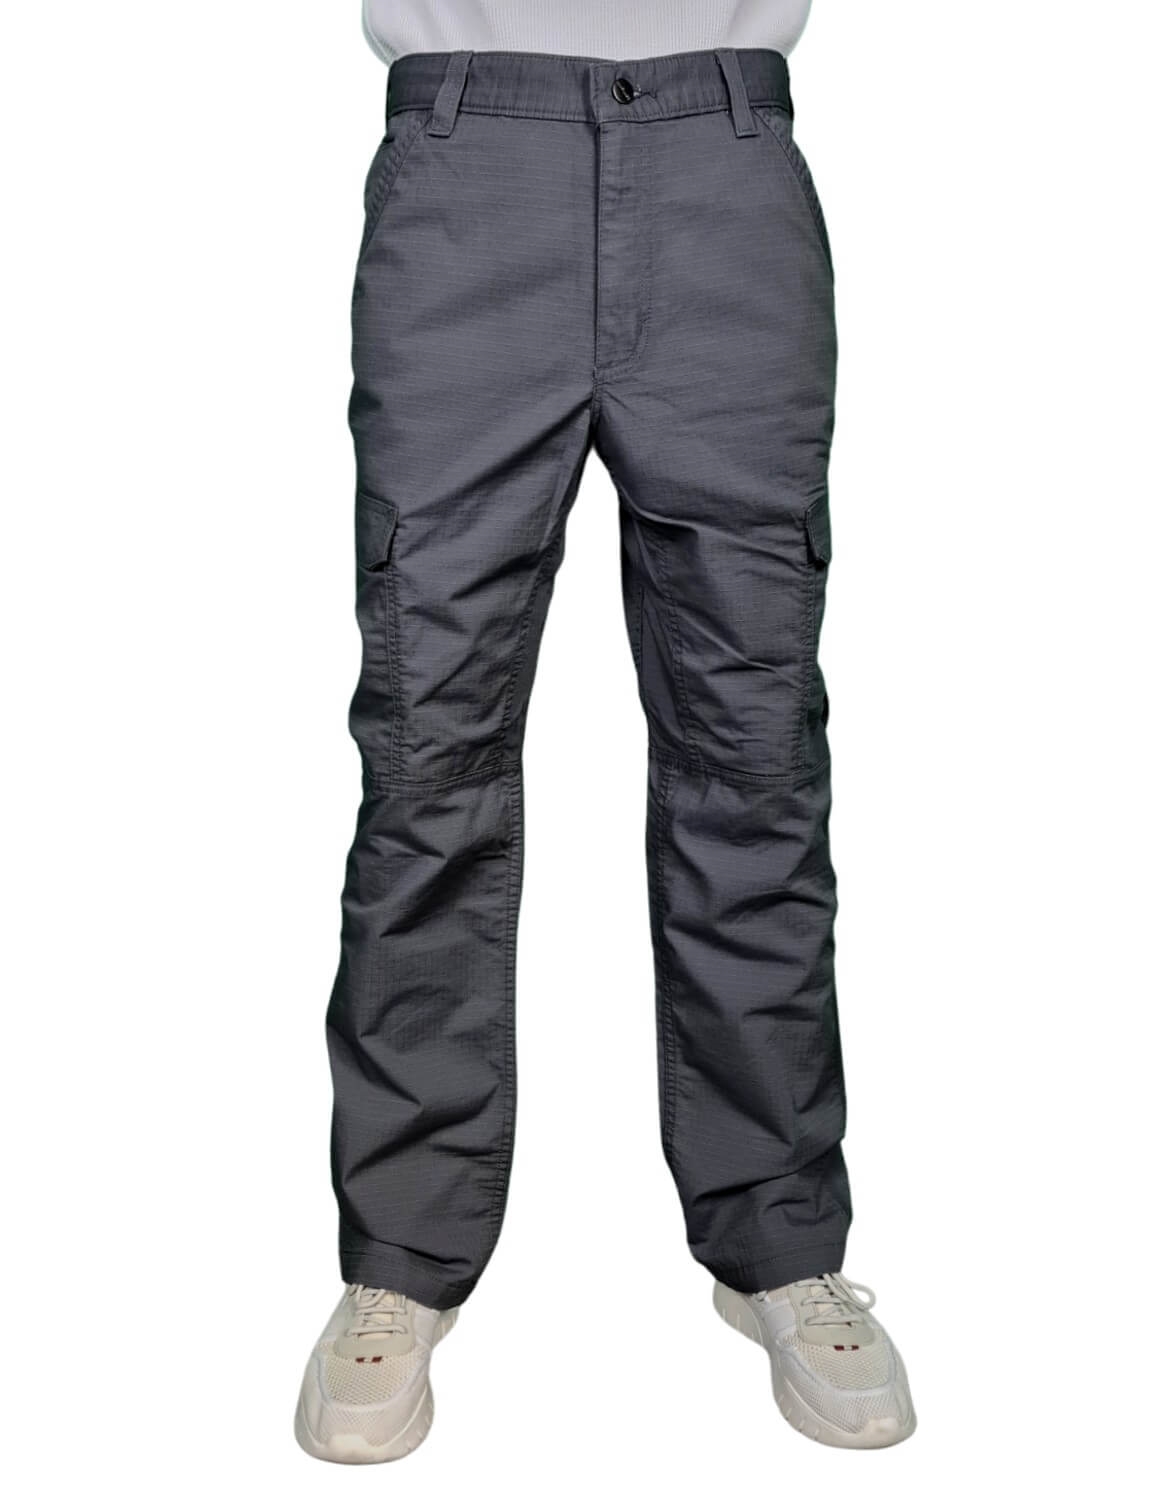 Carhartt Force Relaxed Fit Ripstop Cargo Work Pant - Coup Manukau